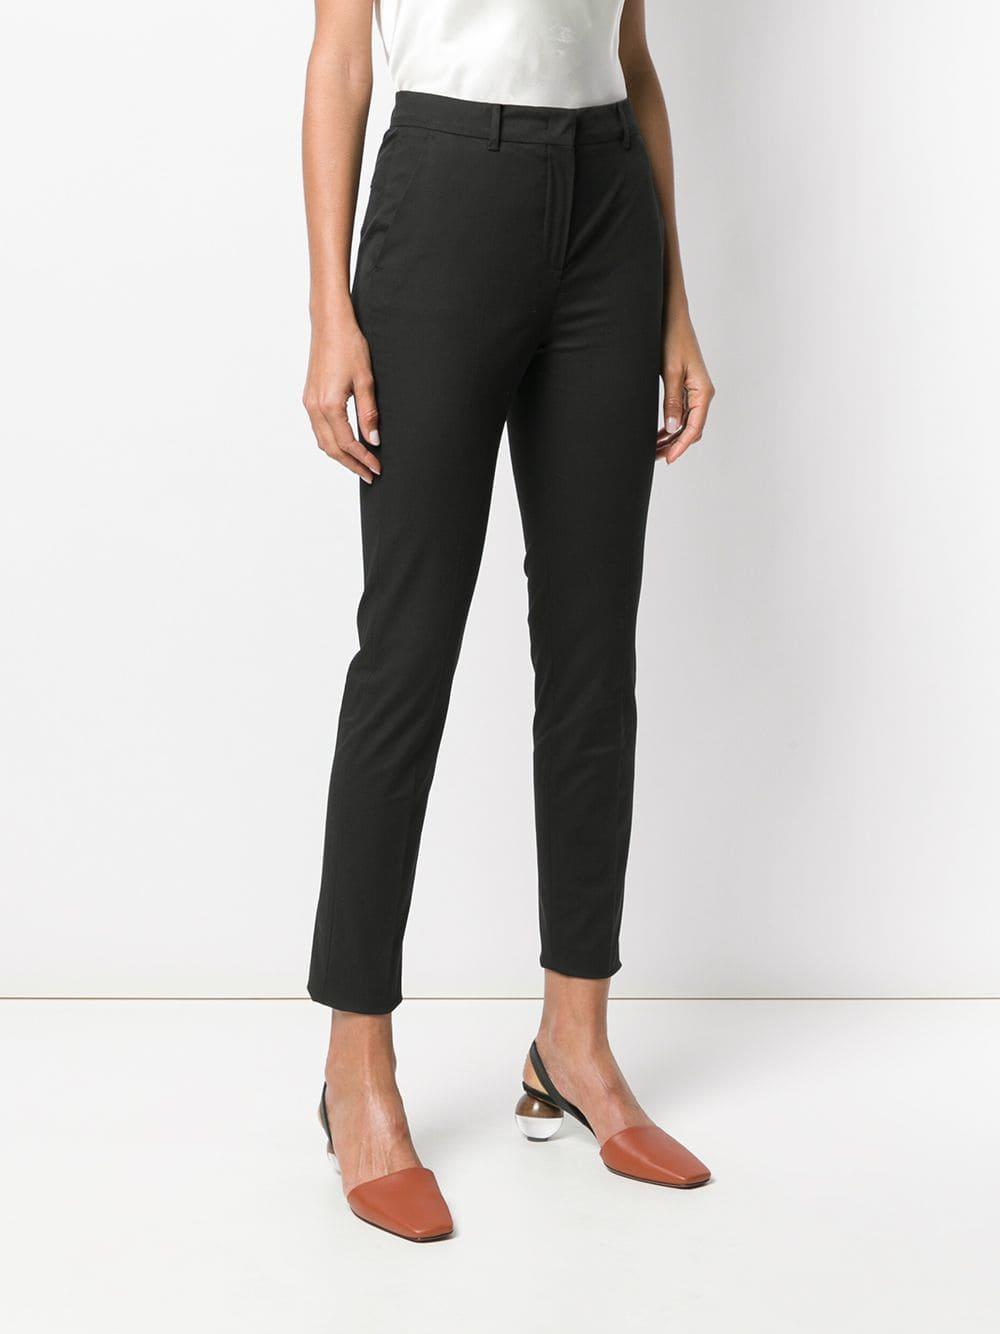 Max Mara Cotton Tailored Cropped Trousers in Black - Lyst